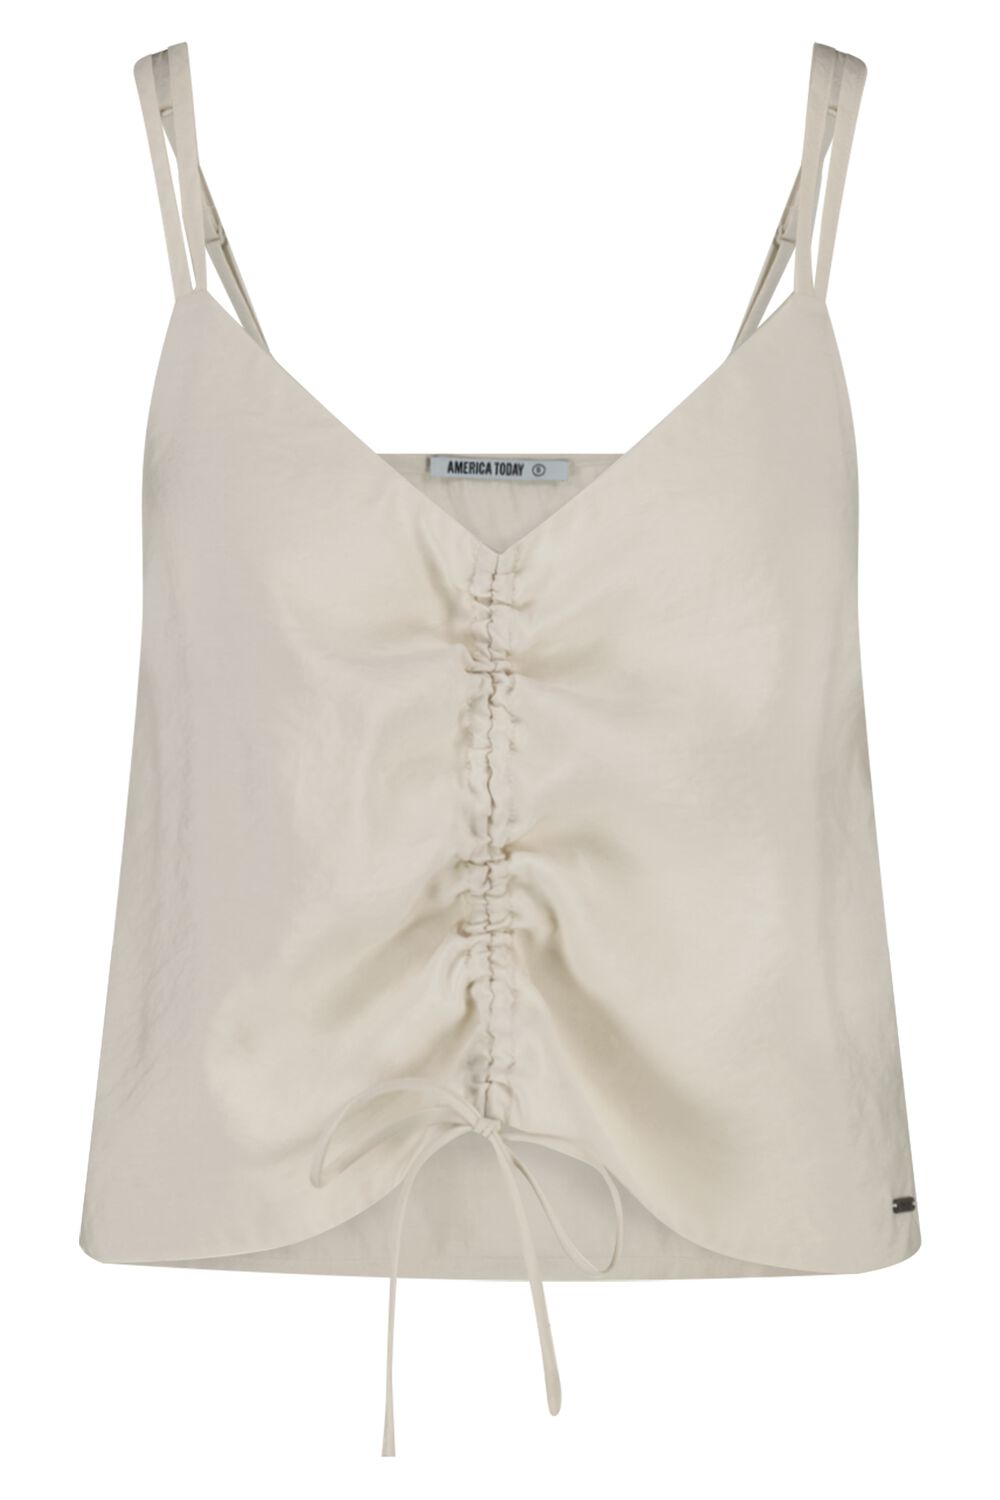 America Today Dames Top Ivory Beige